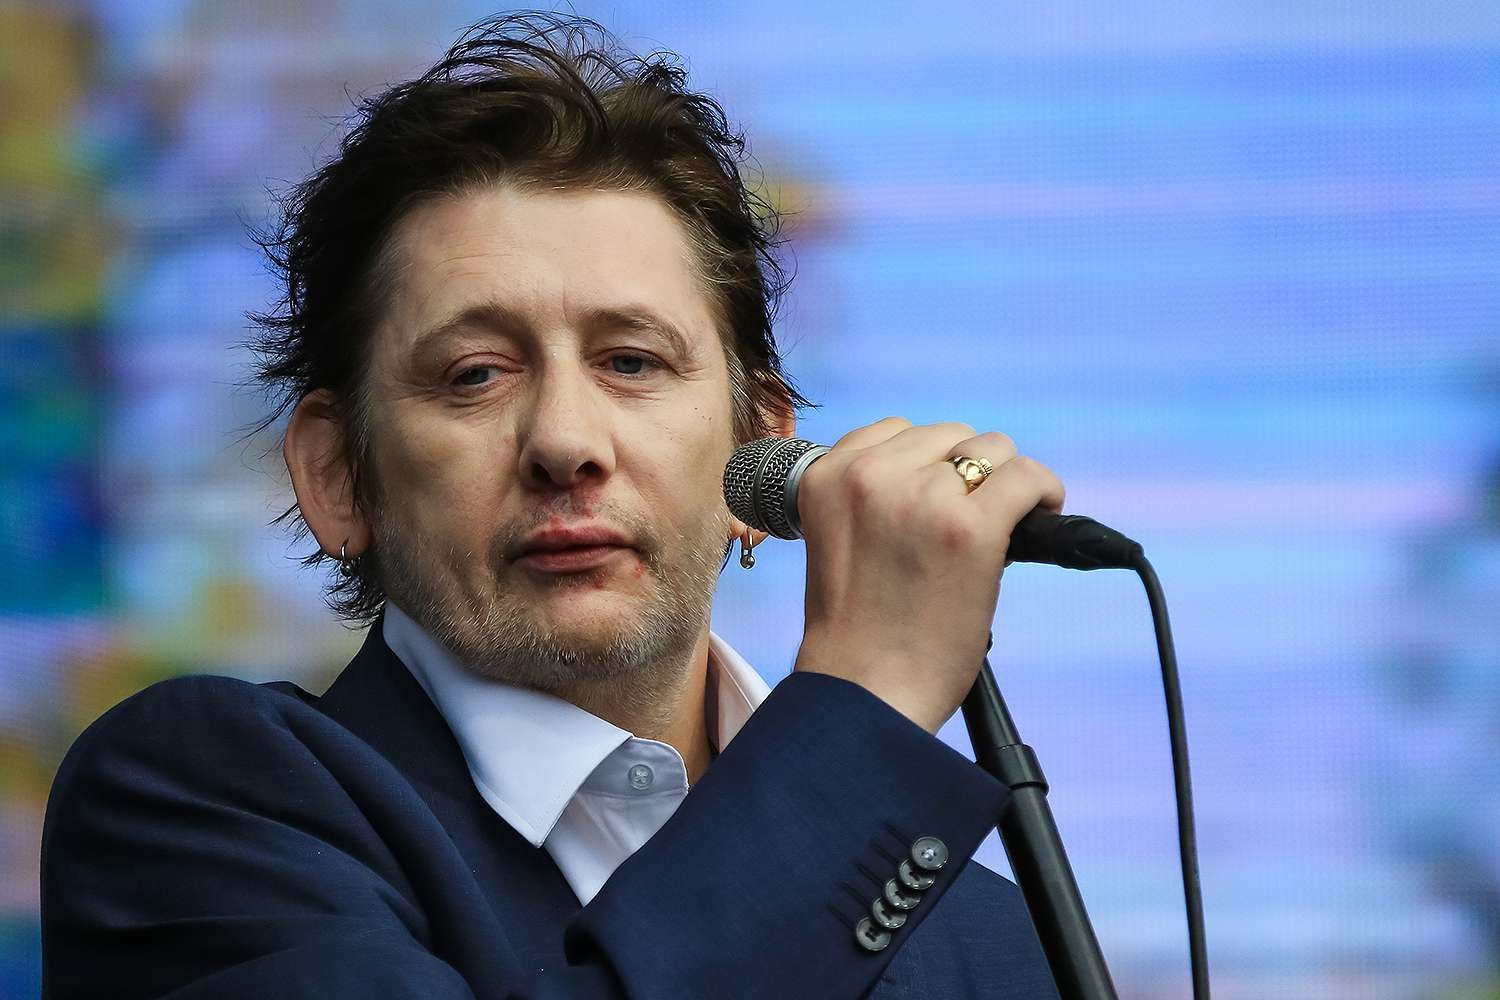 Shane Macgowan Teeth Before and After the Fracture